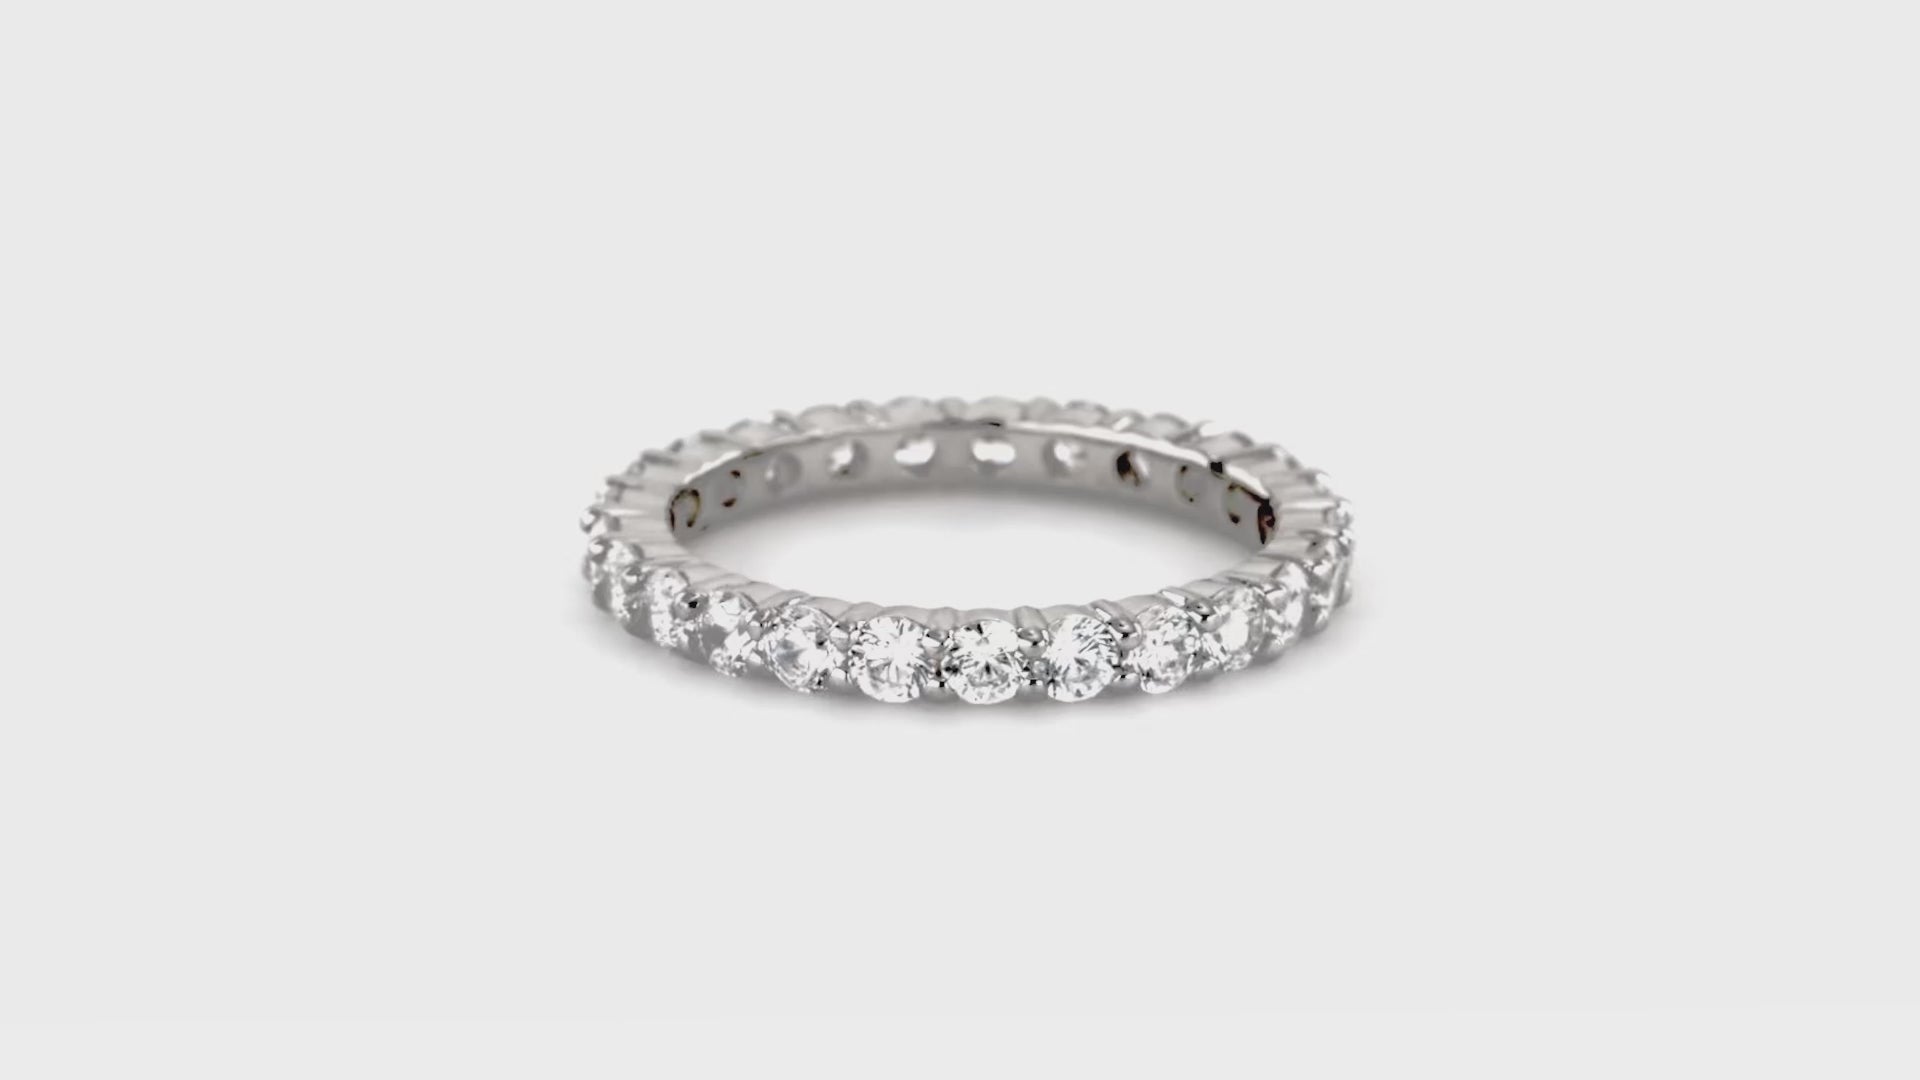 Video Contains Pave Set CZ Eternity Ring in Sterling Silver. Style Number R448-25